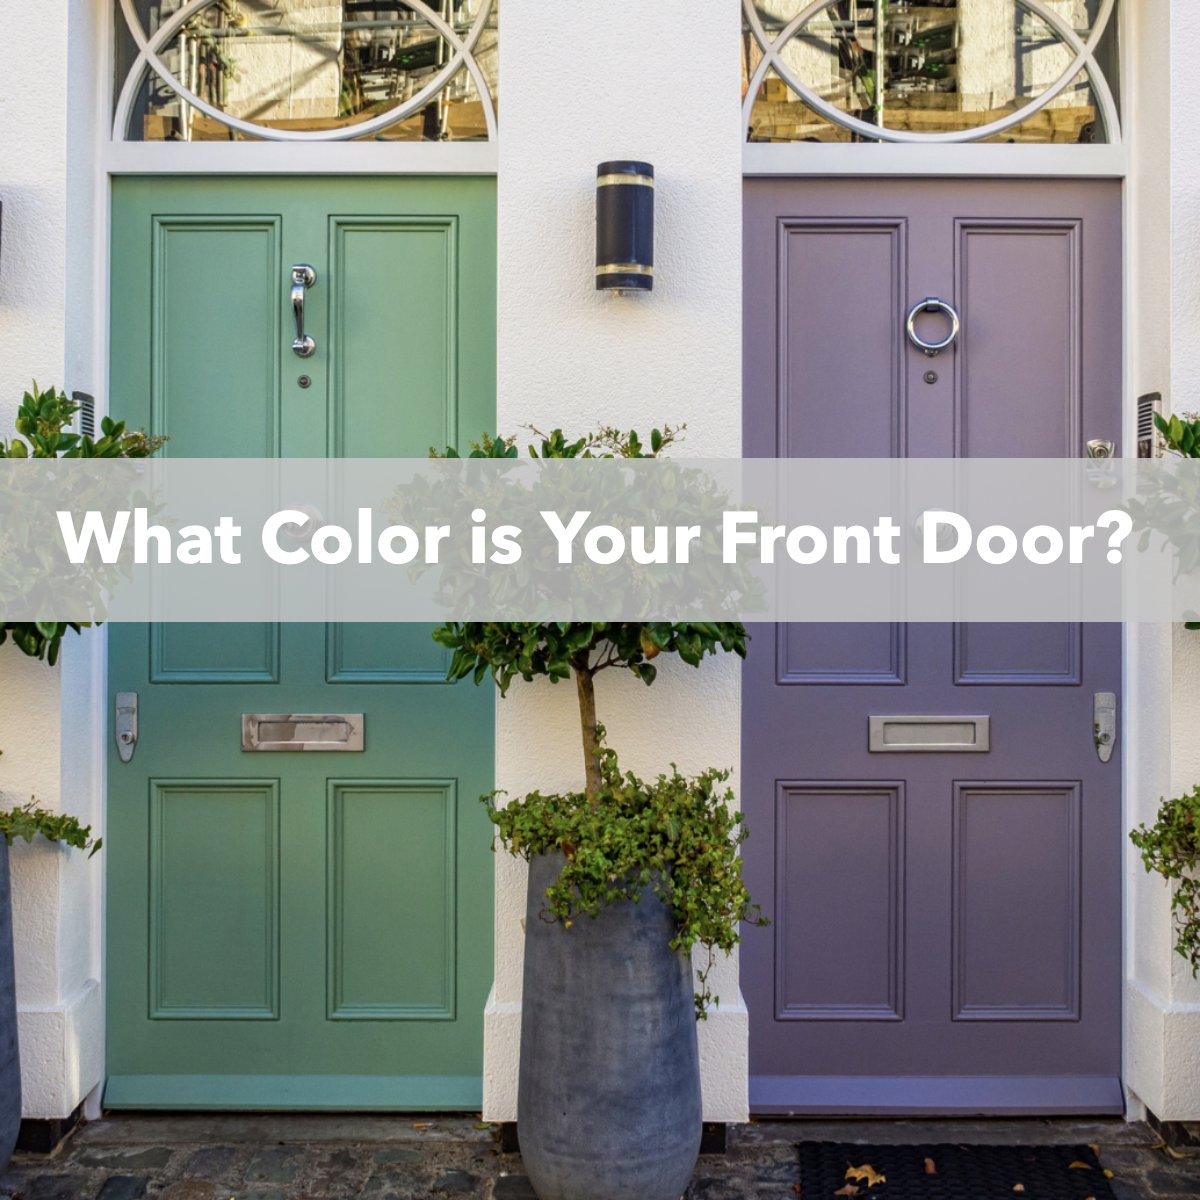 Did you select the color or did you just settle? 🤔 Tell us in the comments! 👇 #questions #frontdoor #doorcolor #exterior #realestate #premierrealestatenetwork #pren #realestate #realtor #prescottquadcity #sedonaverdevalley #veronicamorrow #myhomegroup